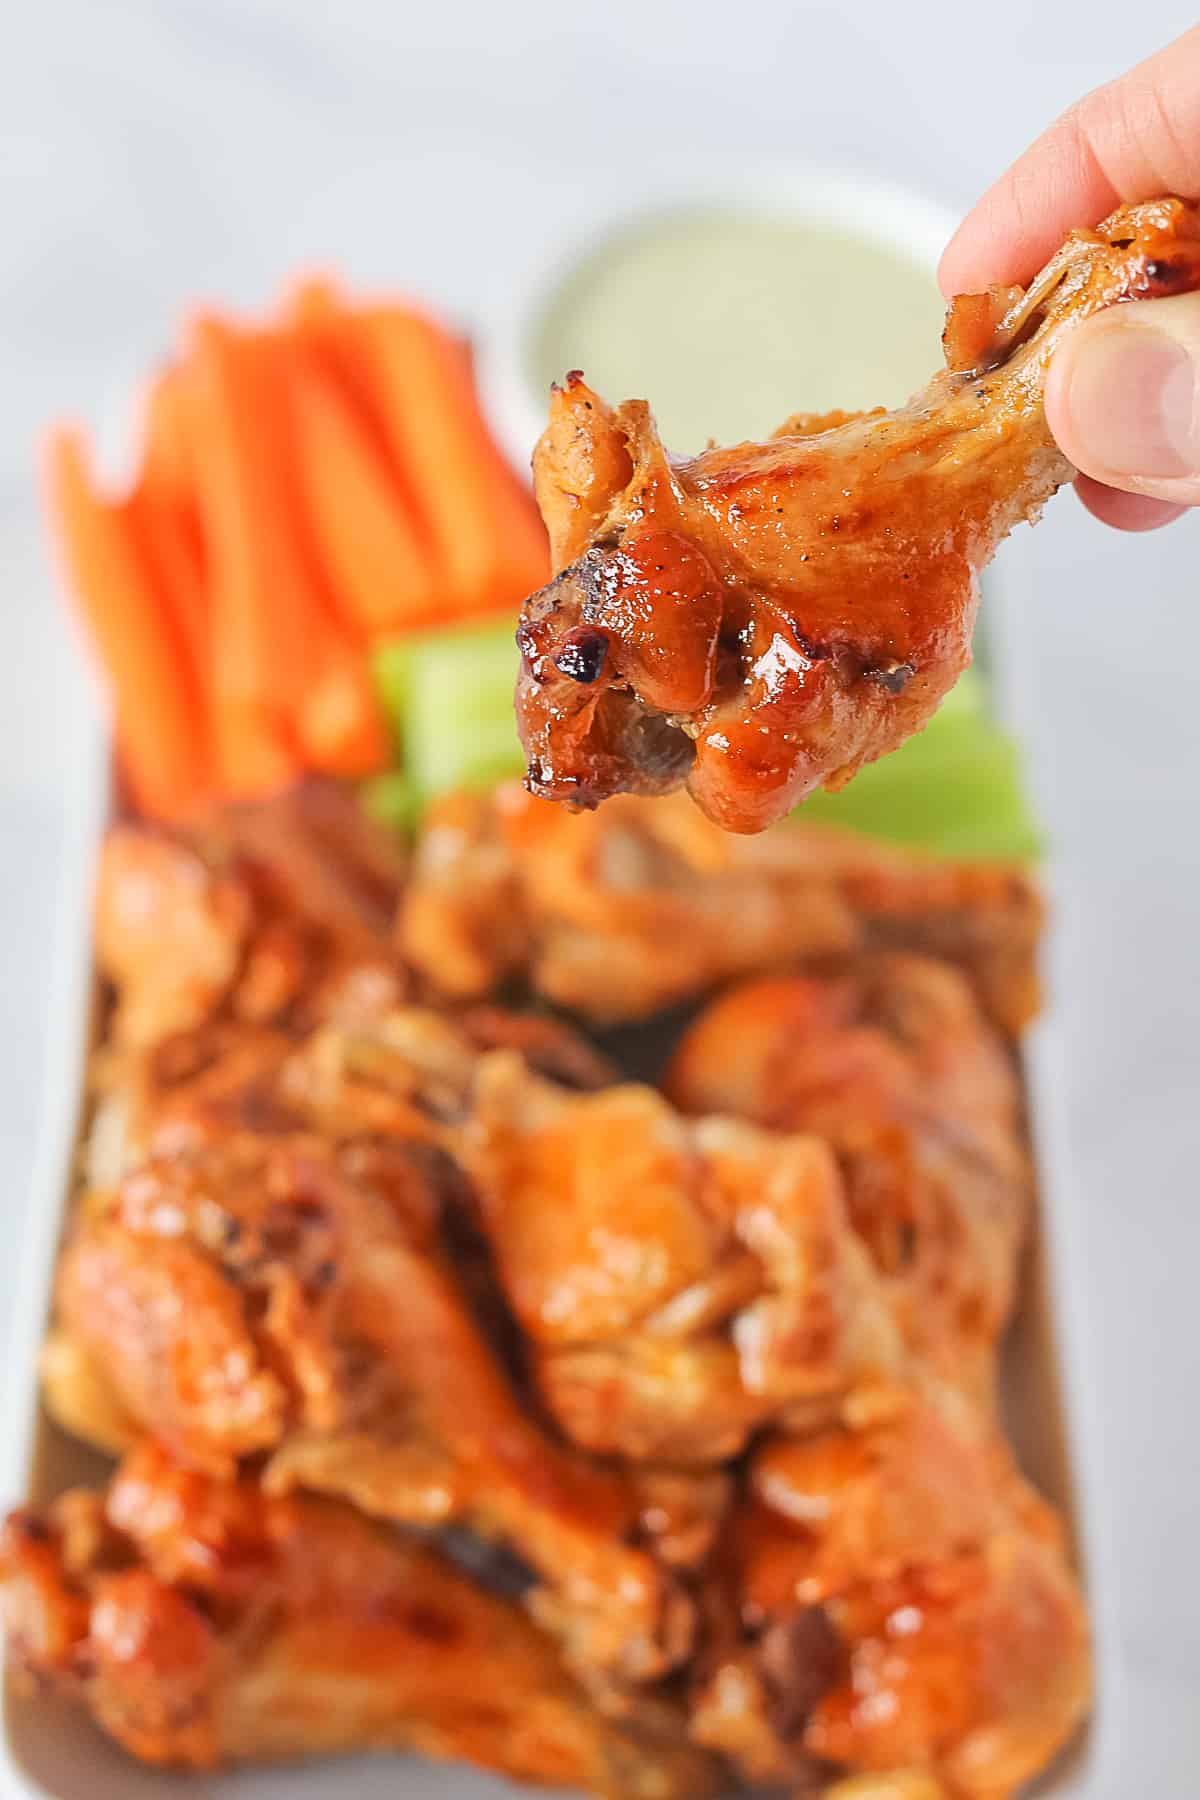 Instant Pot Chicken Wings, one wing being picked up, on a white serving plate with carrots, celery and homemade ranch dressing.